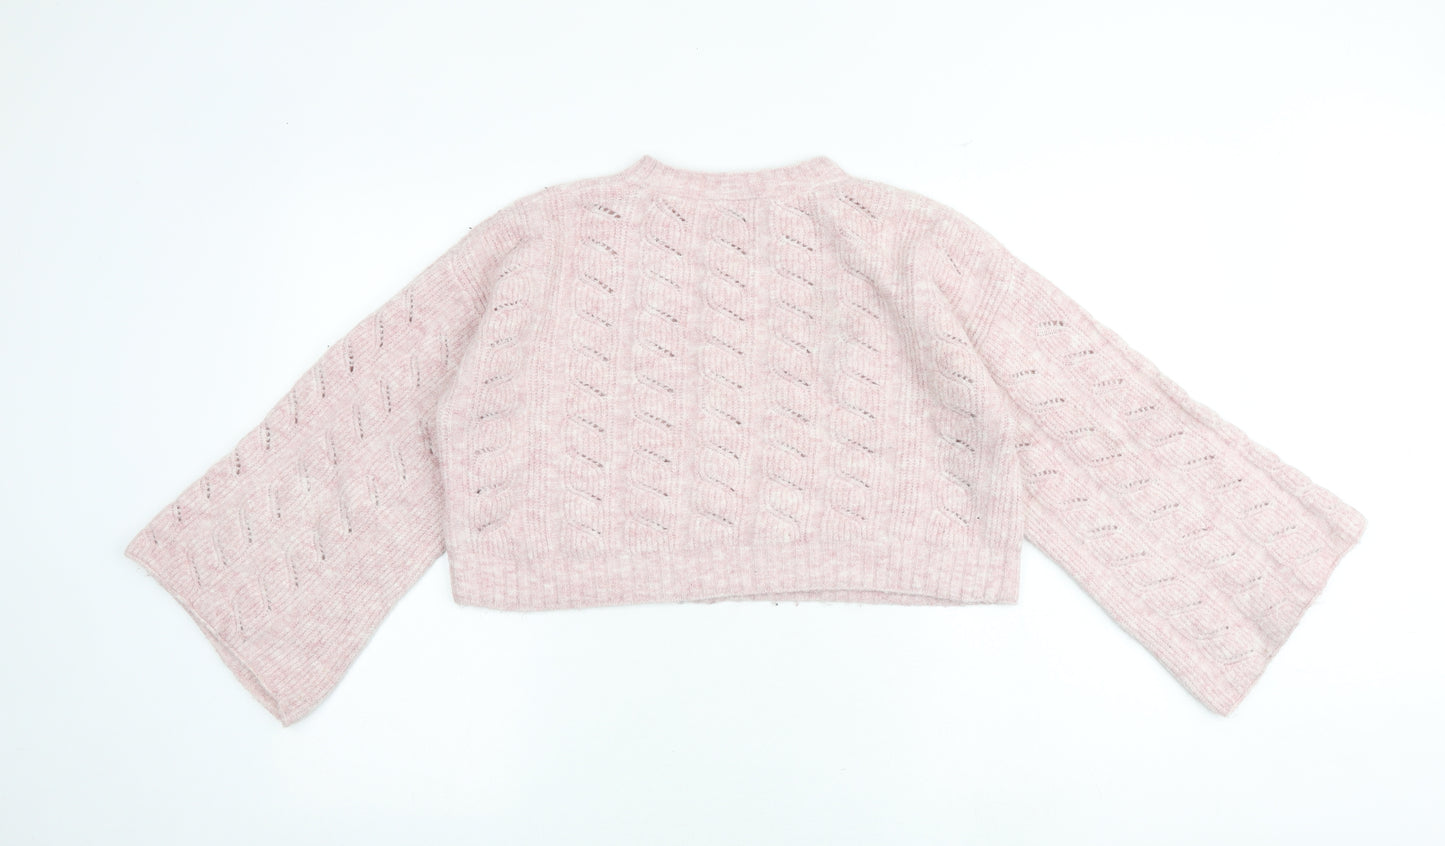 Topshop Womens Pink Round Neck Acrylic Pullover Jumper Size 10 - Cropped